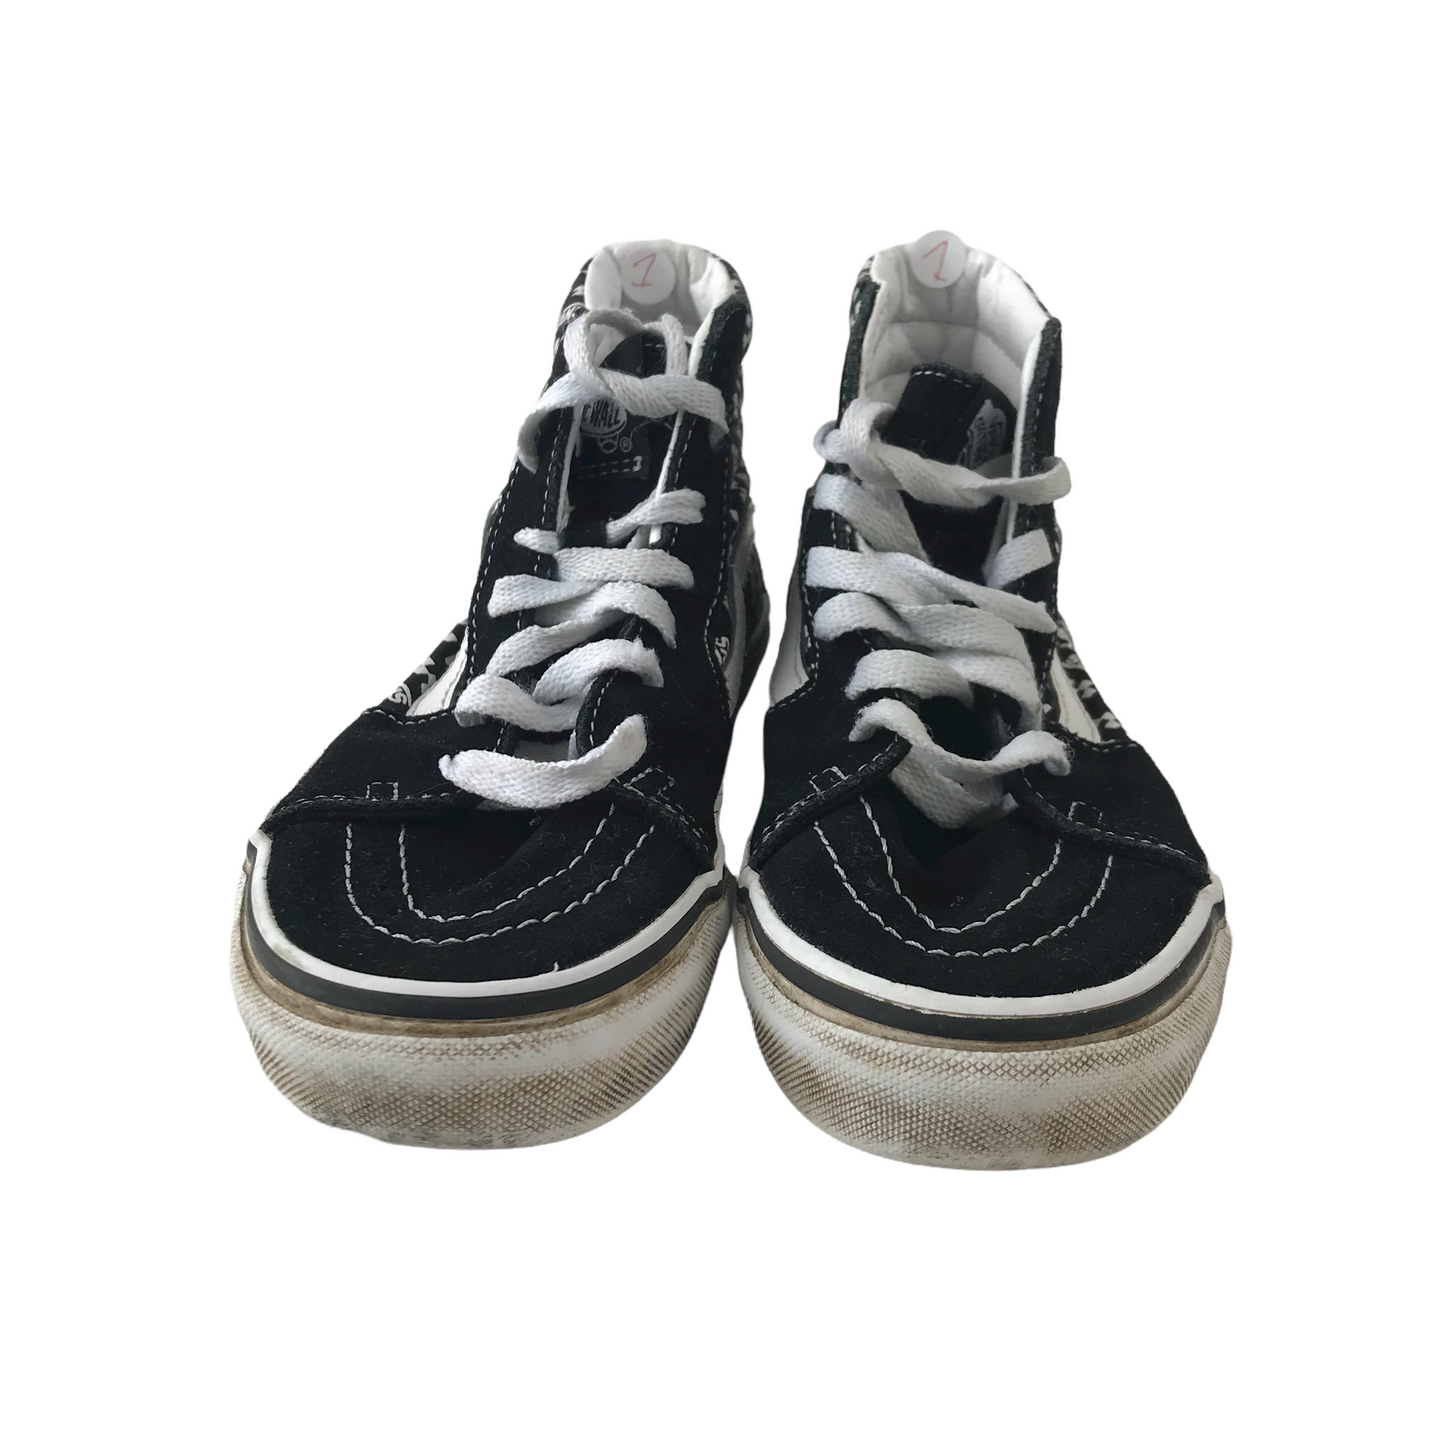 Vans Black and White High Tops Trainers Shoe Size 1